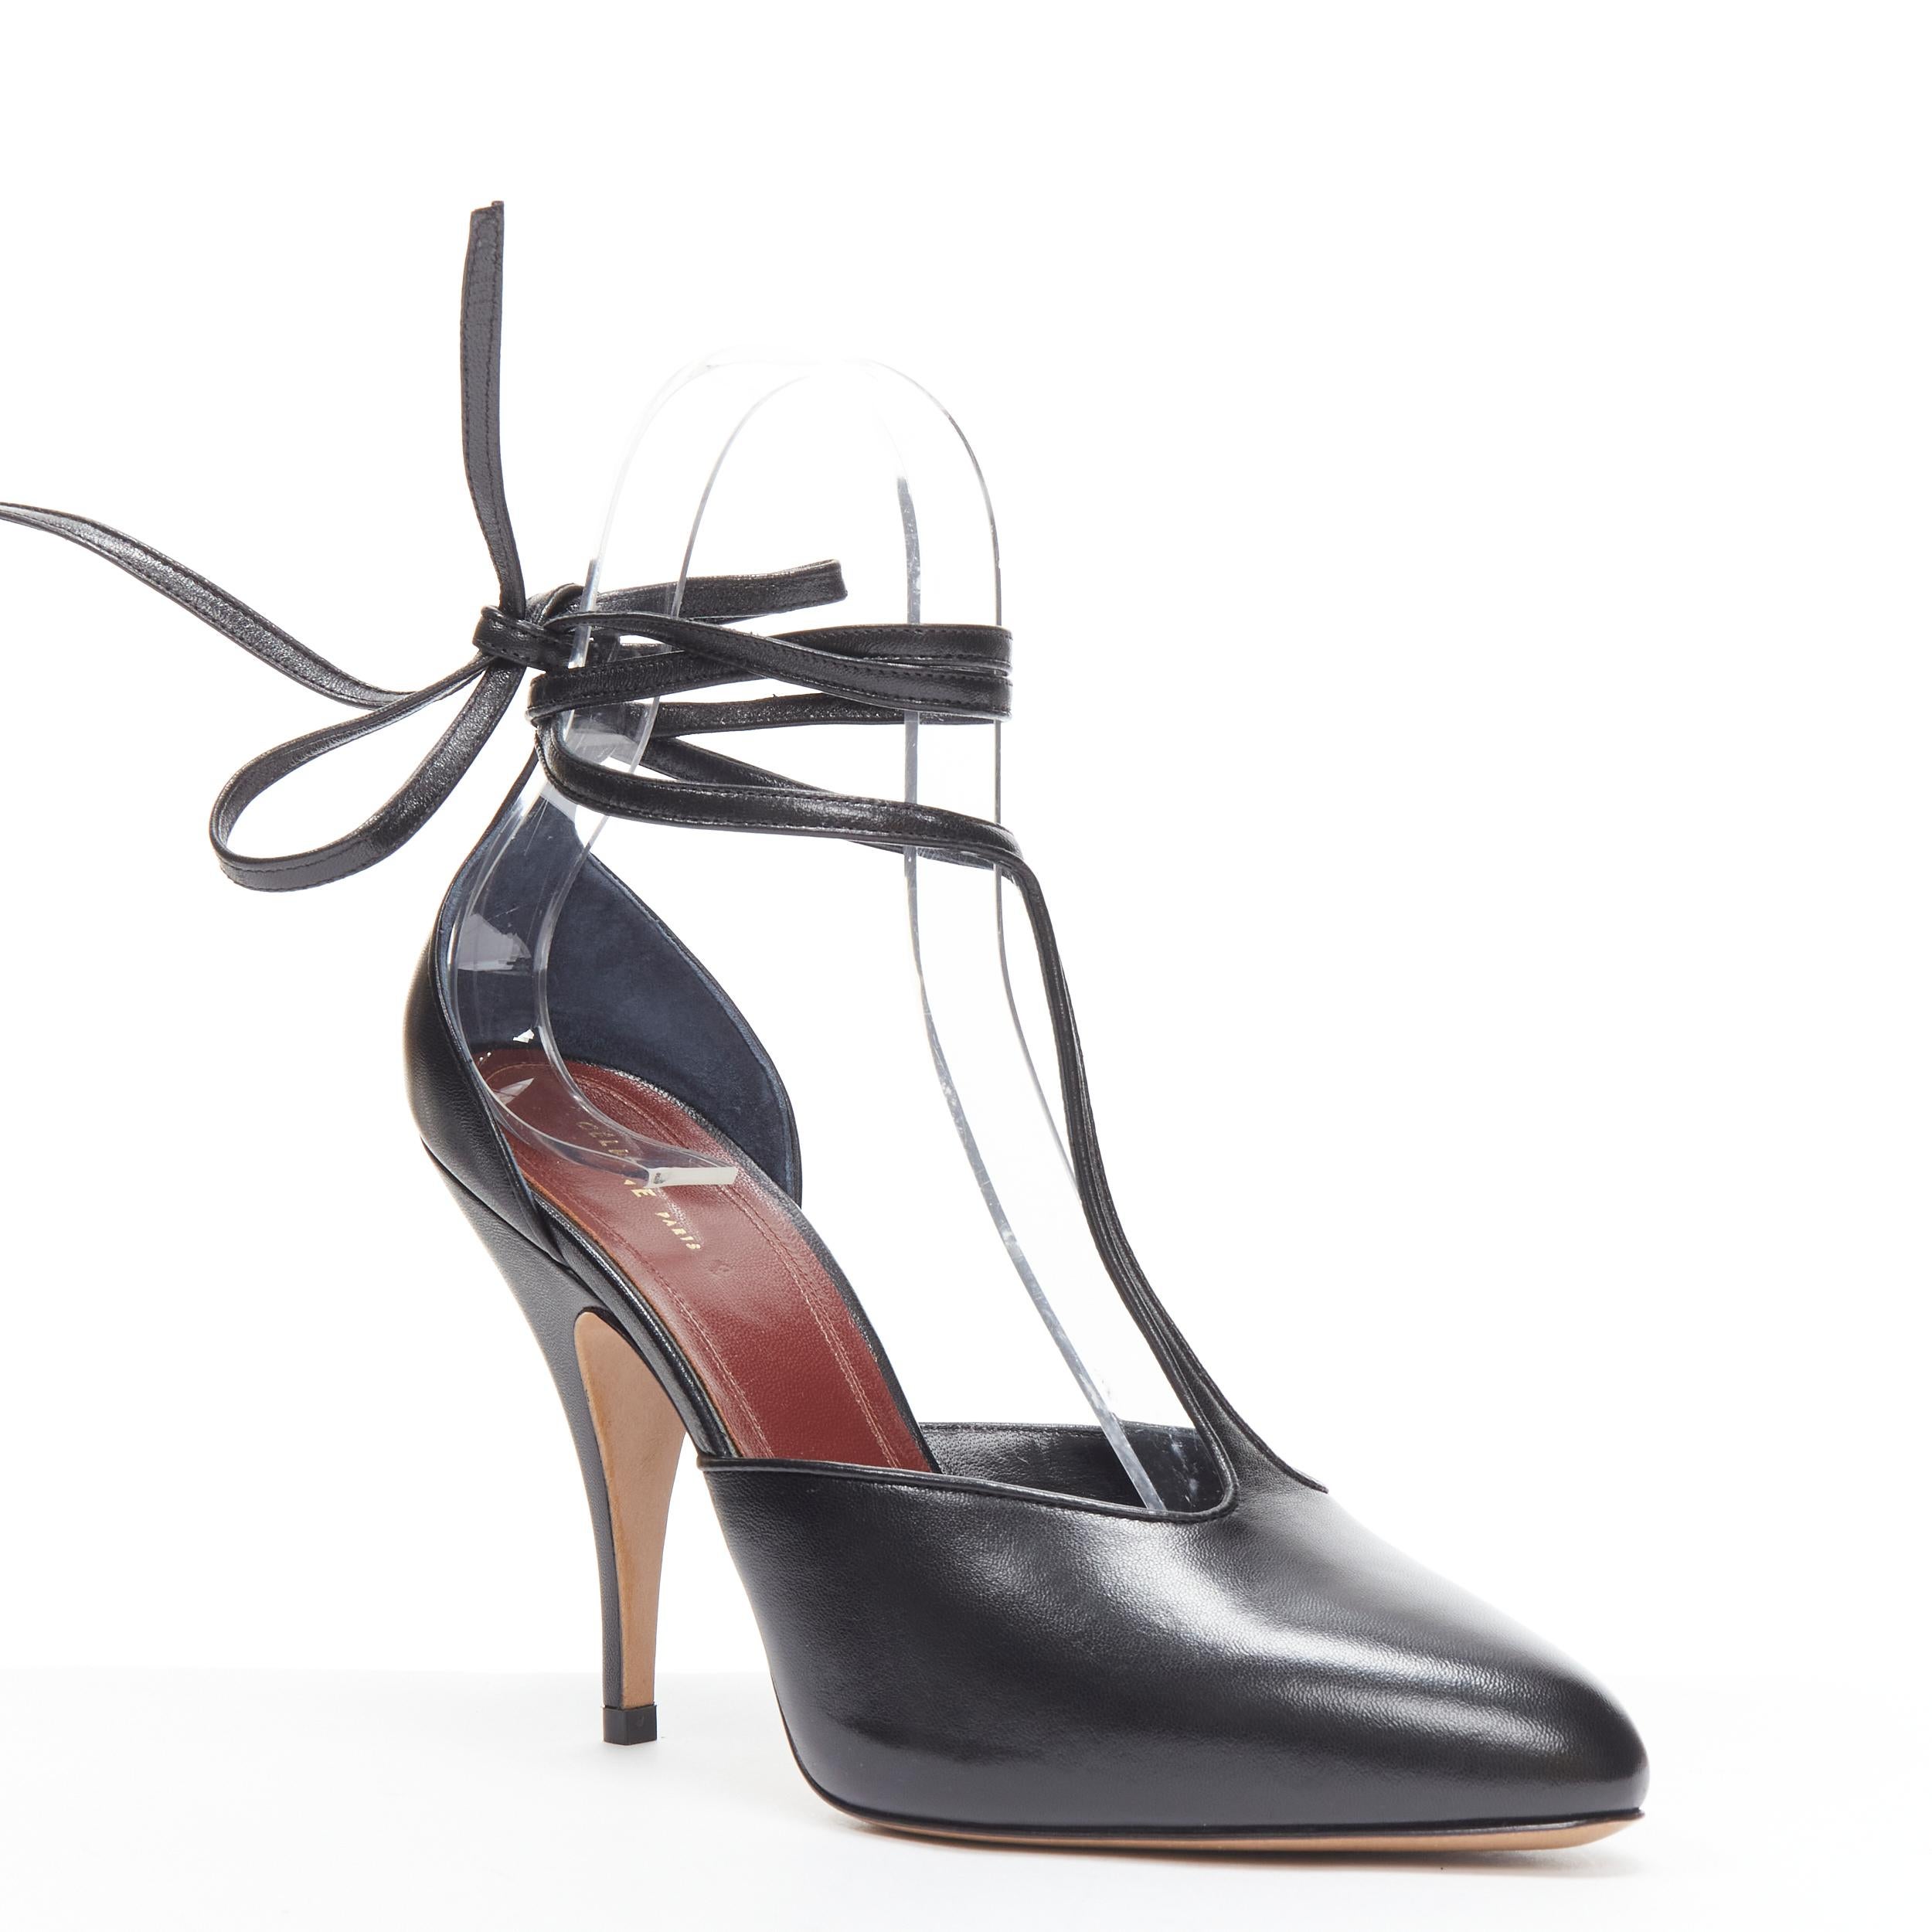 new OLD CELINE 2018 Night Out black wrap around ankle T-strap heels pump EU38 
Reference: TGAS/B02010 
Brand: Celine 
Designer: Phoebe Philo 
Model: Night Out 
Collection: Pre Fall 2018 Runway 
Material: Leather 
Color: Black 
Pattern: Solid